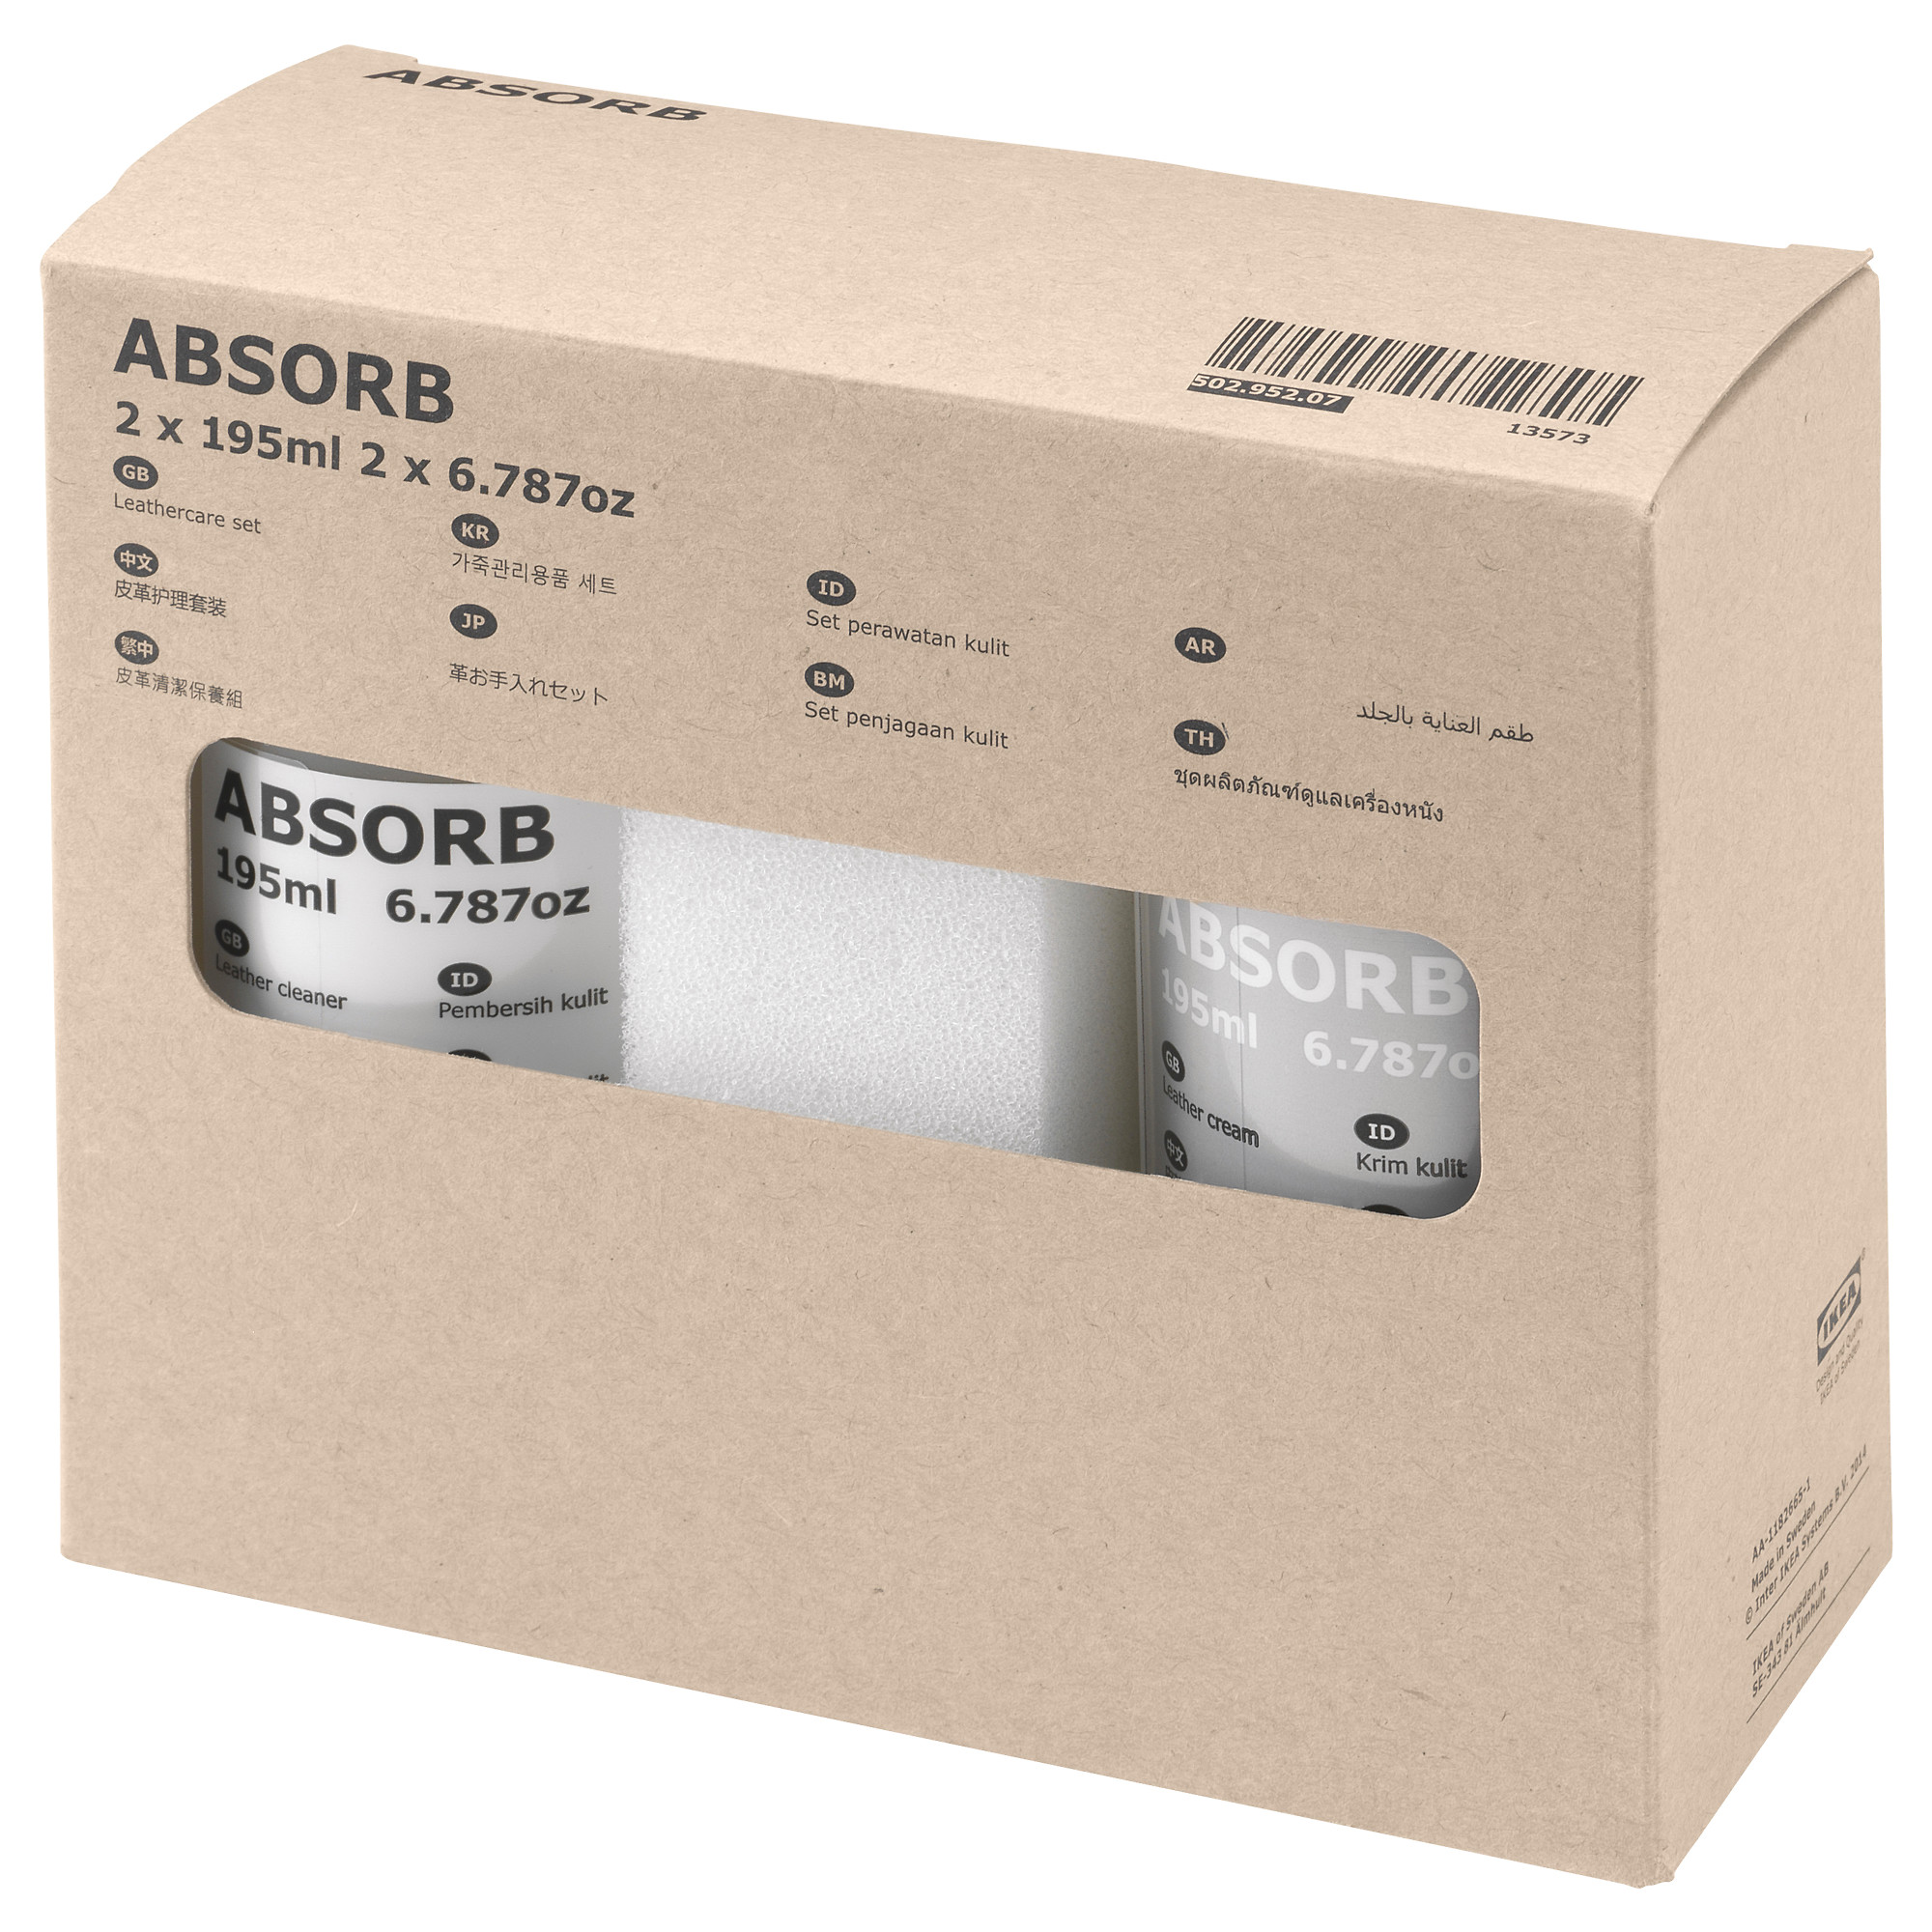 ABSORB leathercare set